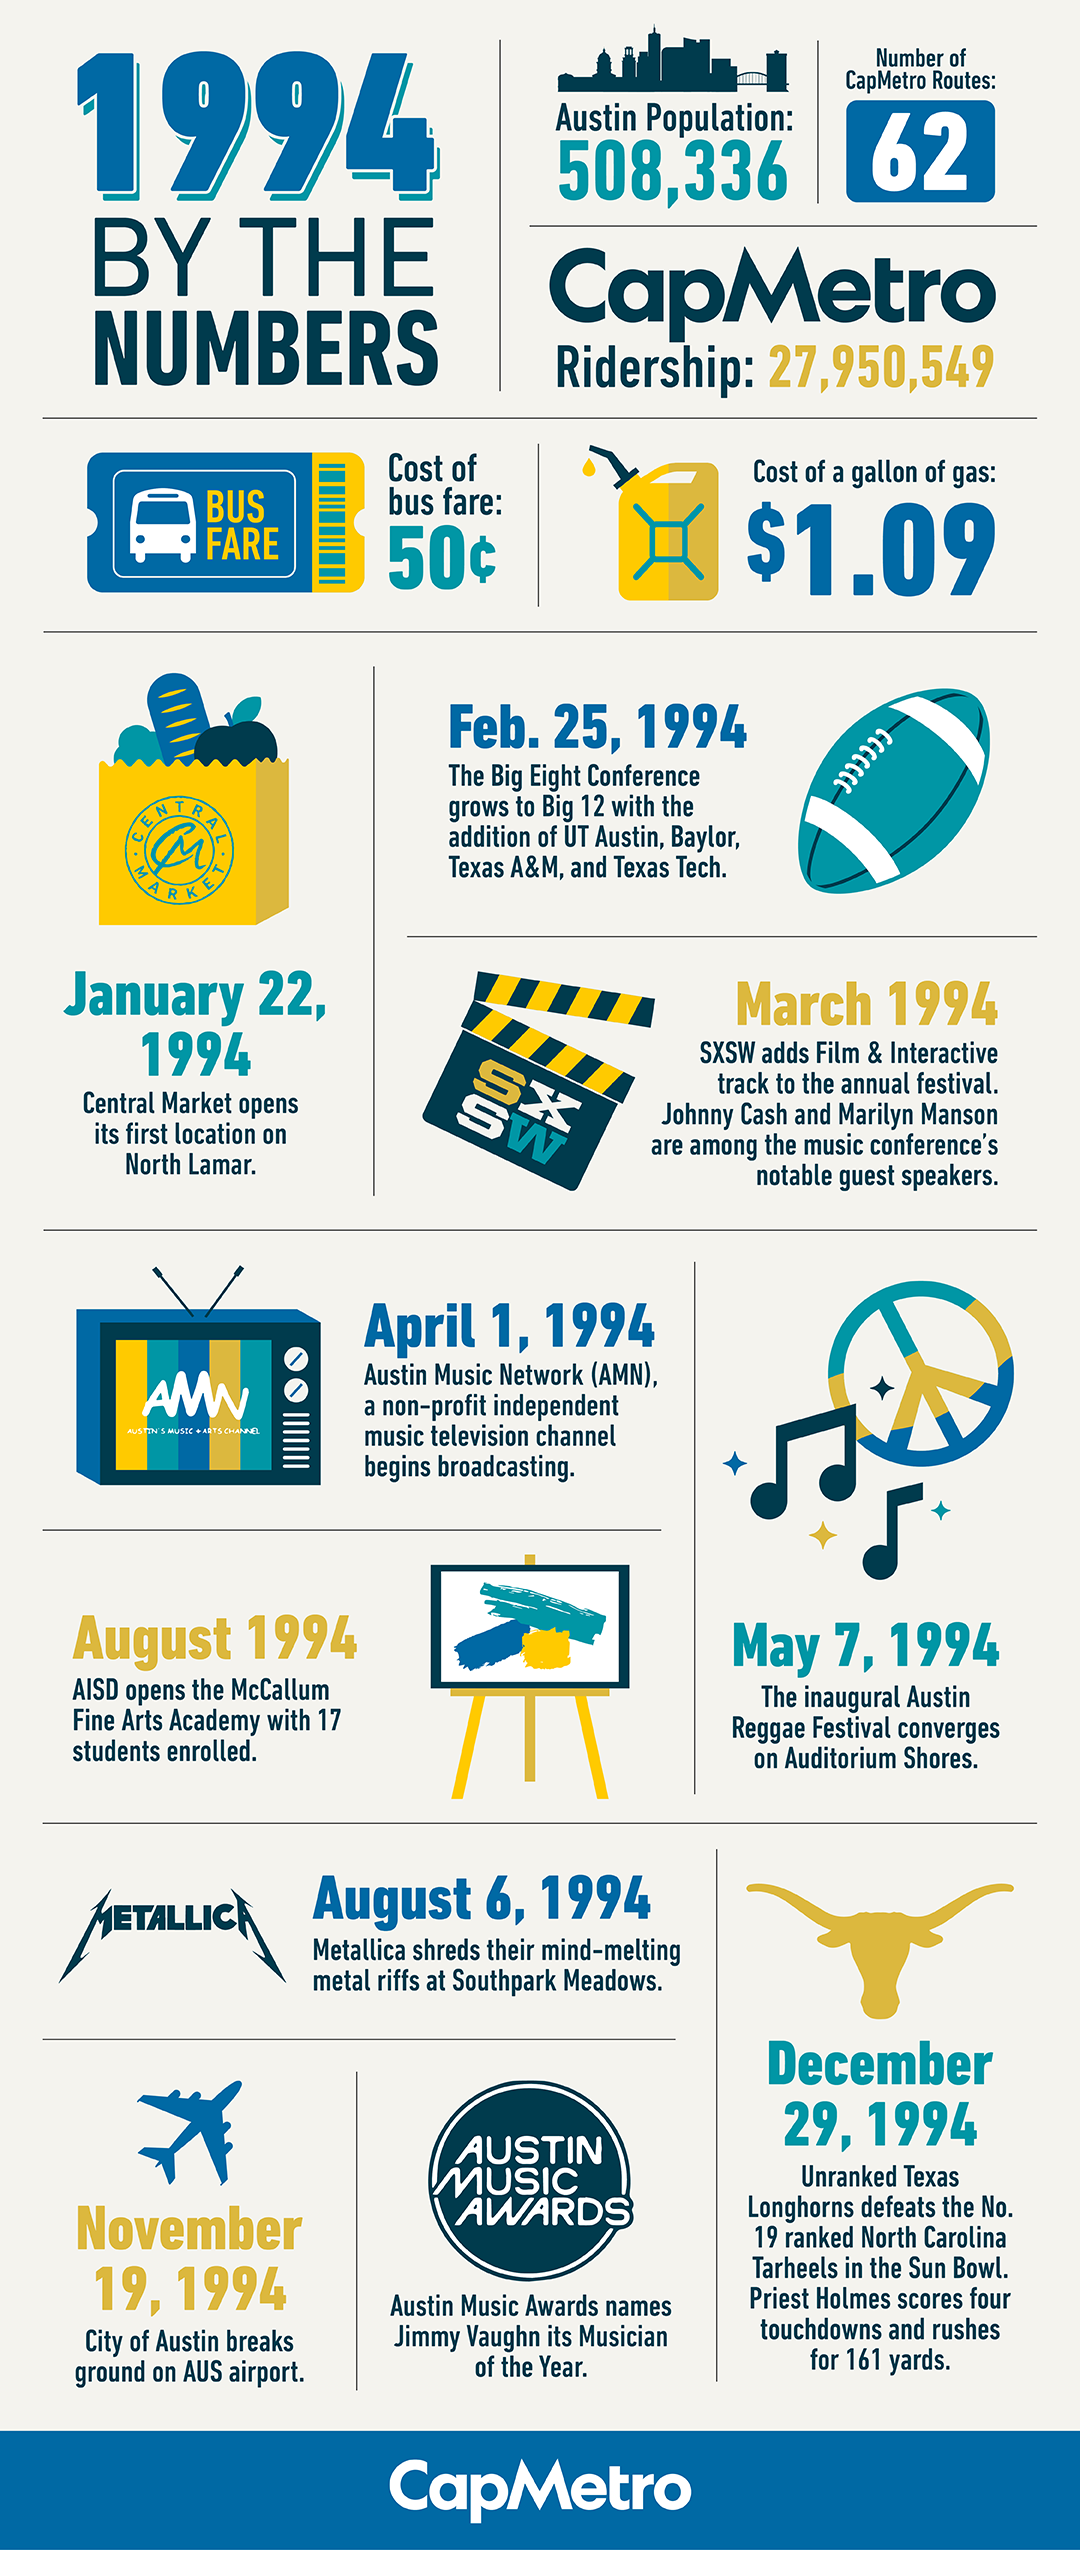 1994 by the numbers infographic showing fun facts happening in Austin in 1994.